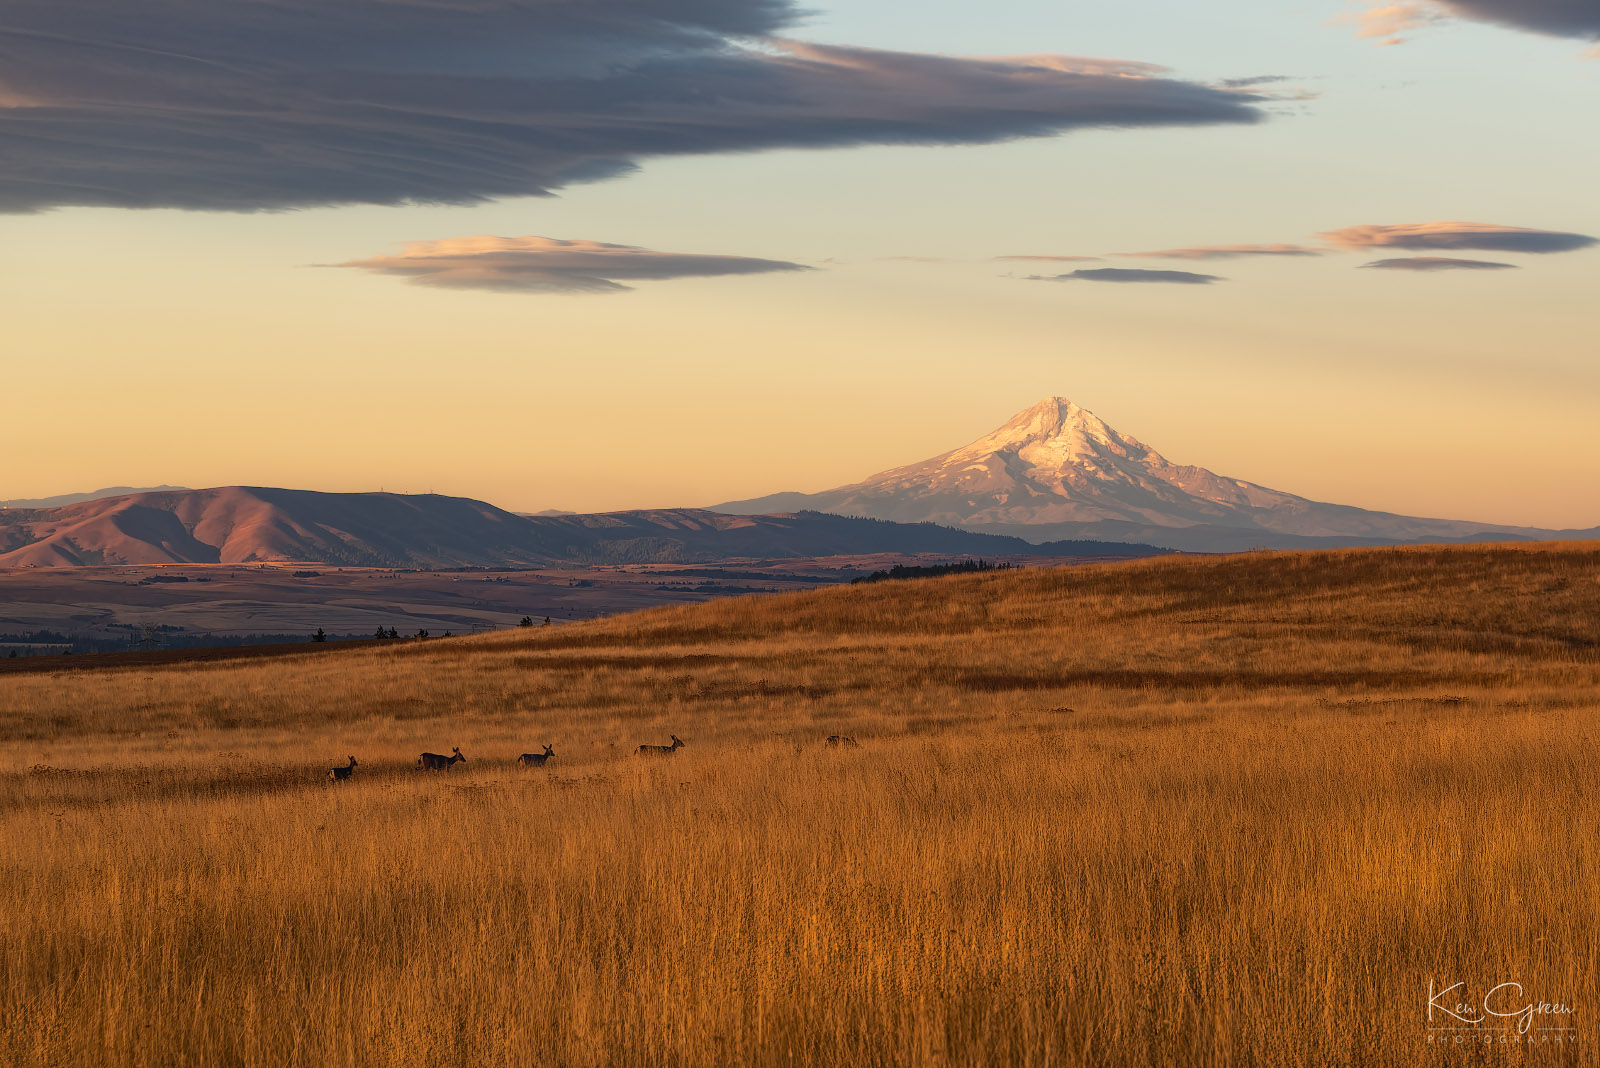 Mount hood and a family of deer in Central Oregon.